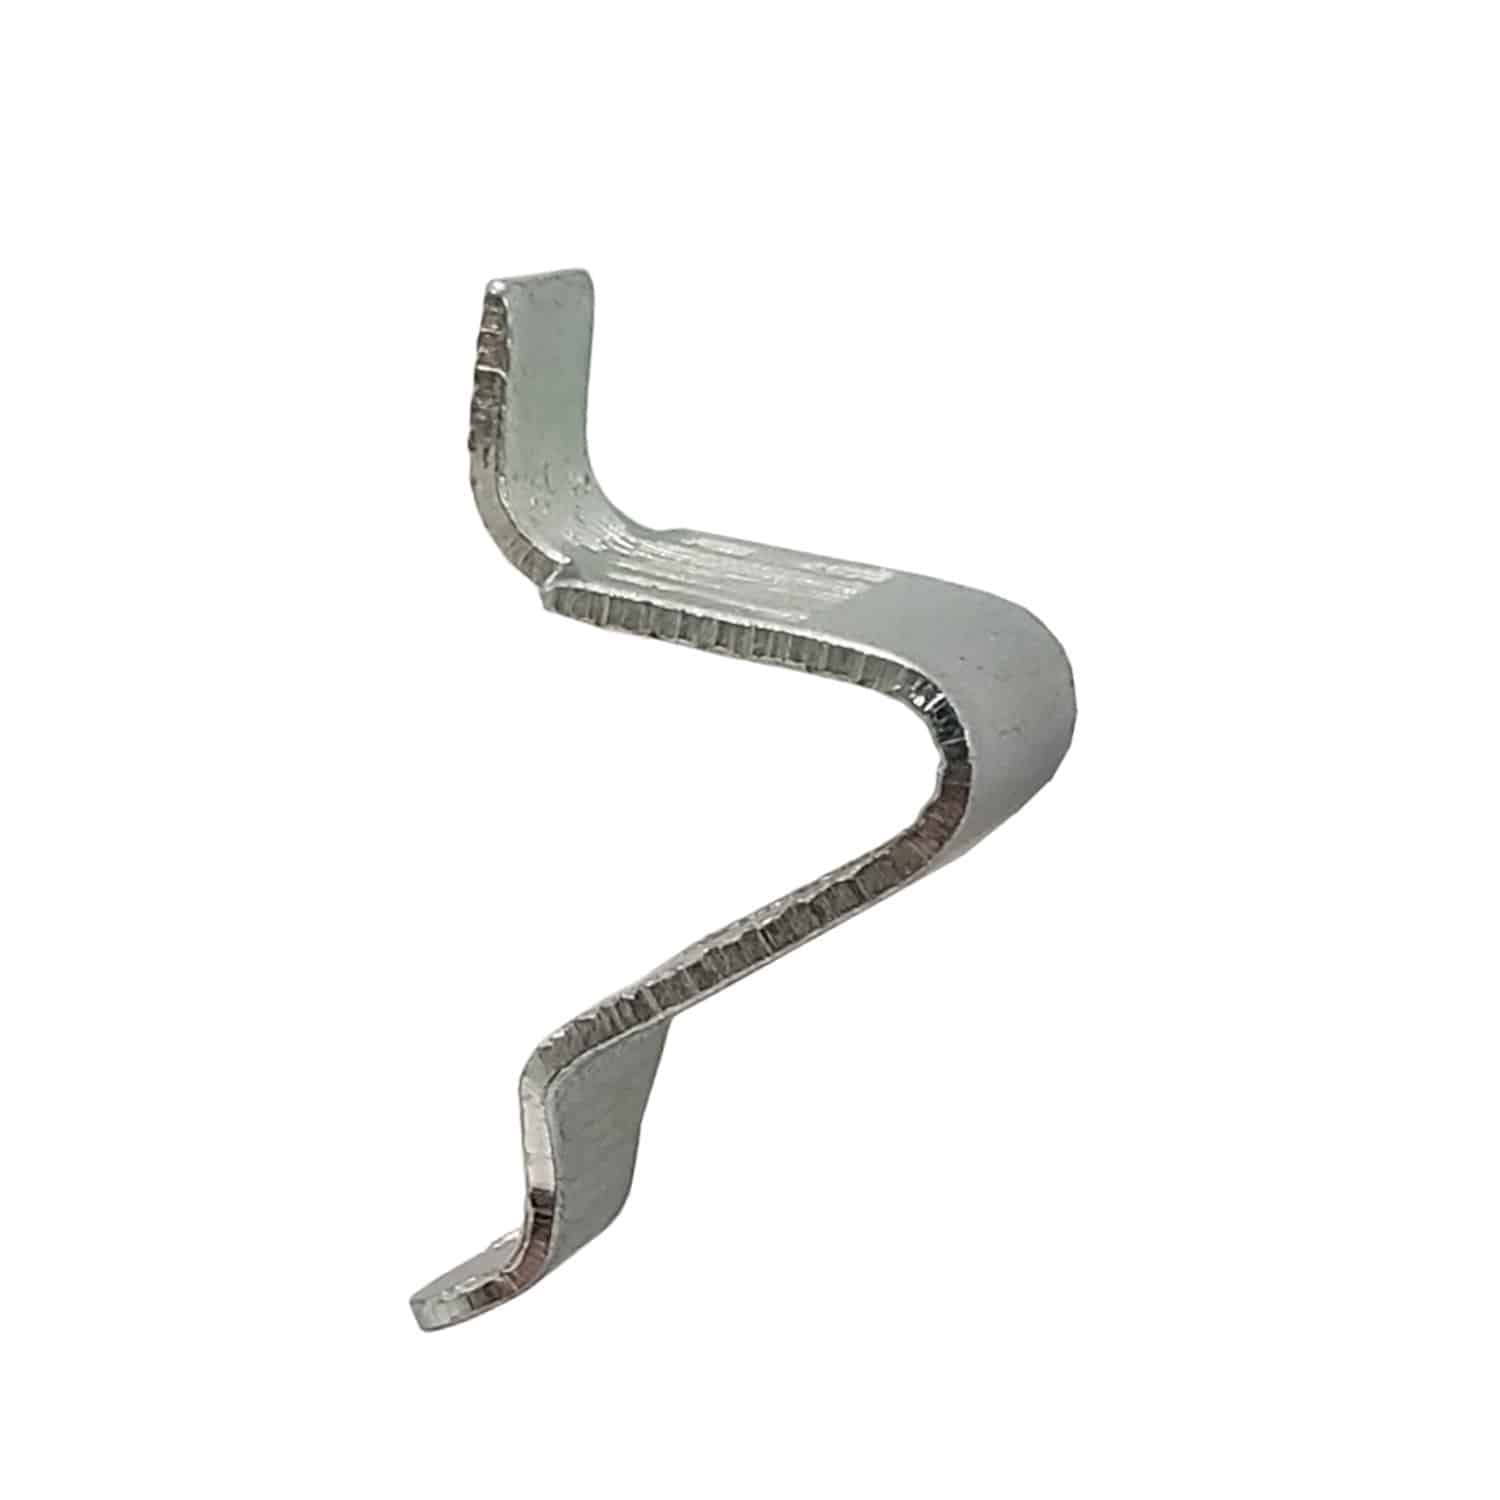 Shelf Clip For 1000 Series Cabinets, Metal Clip Shelving